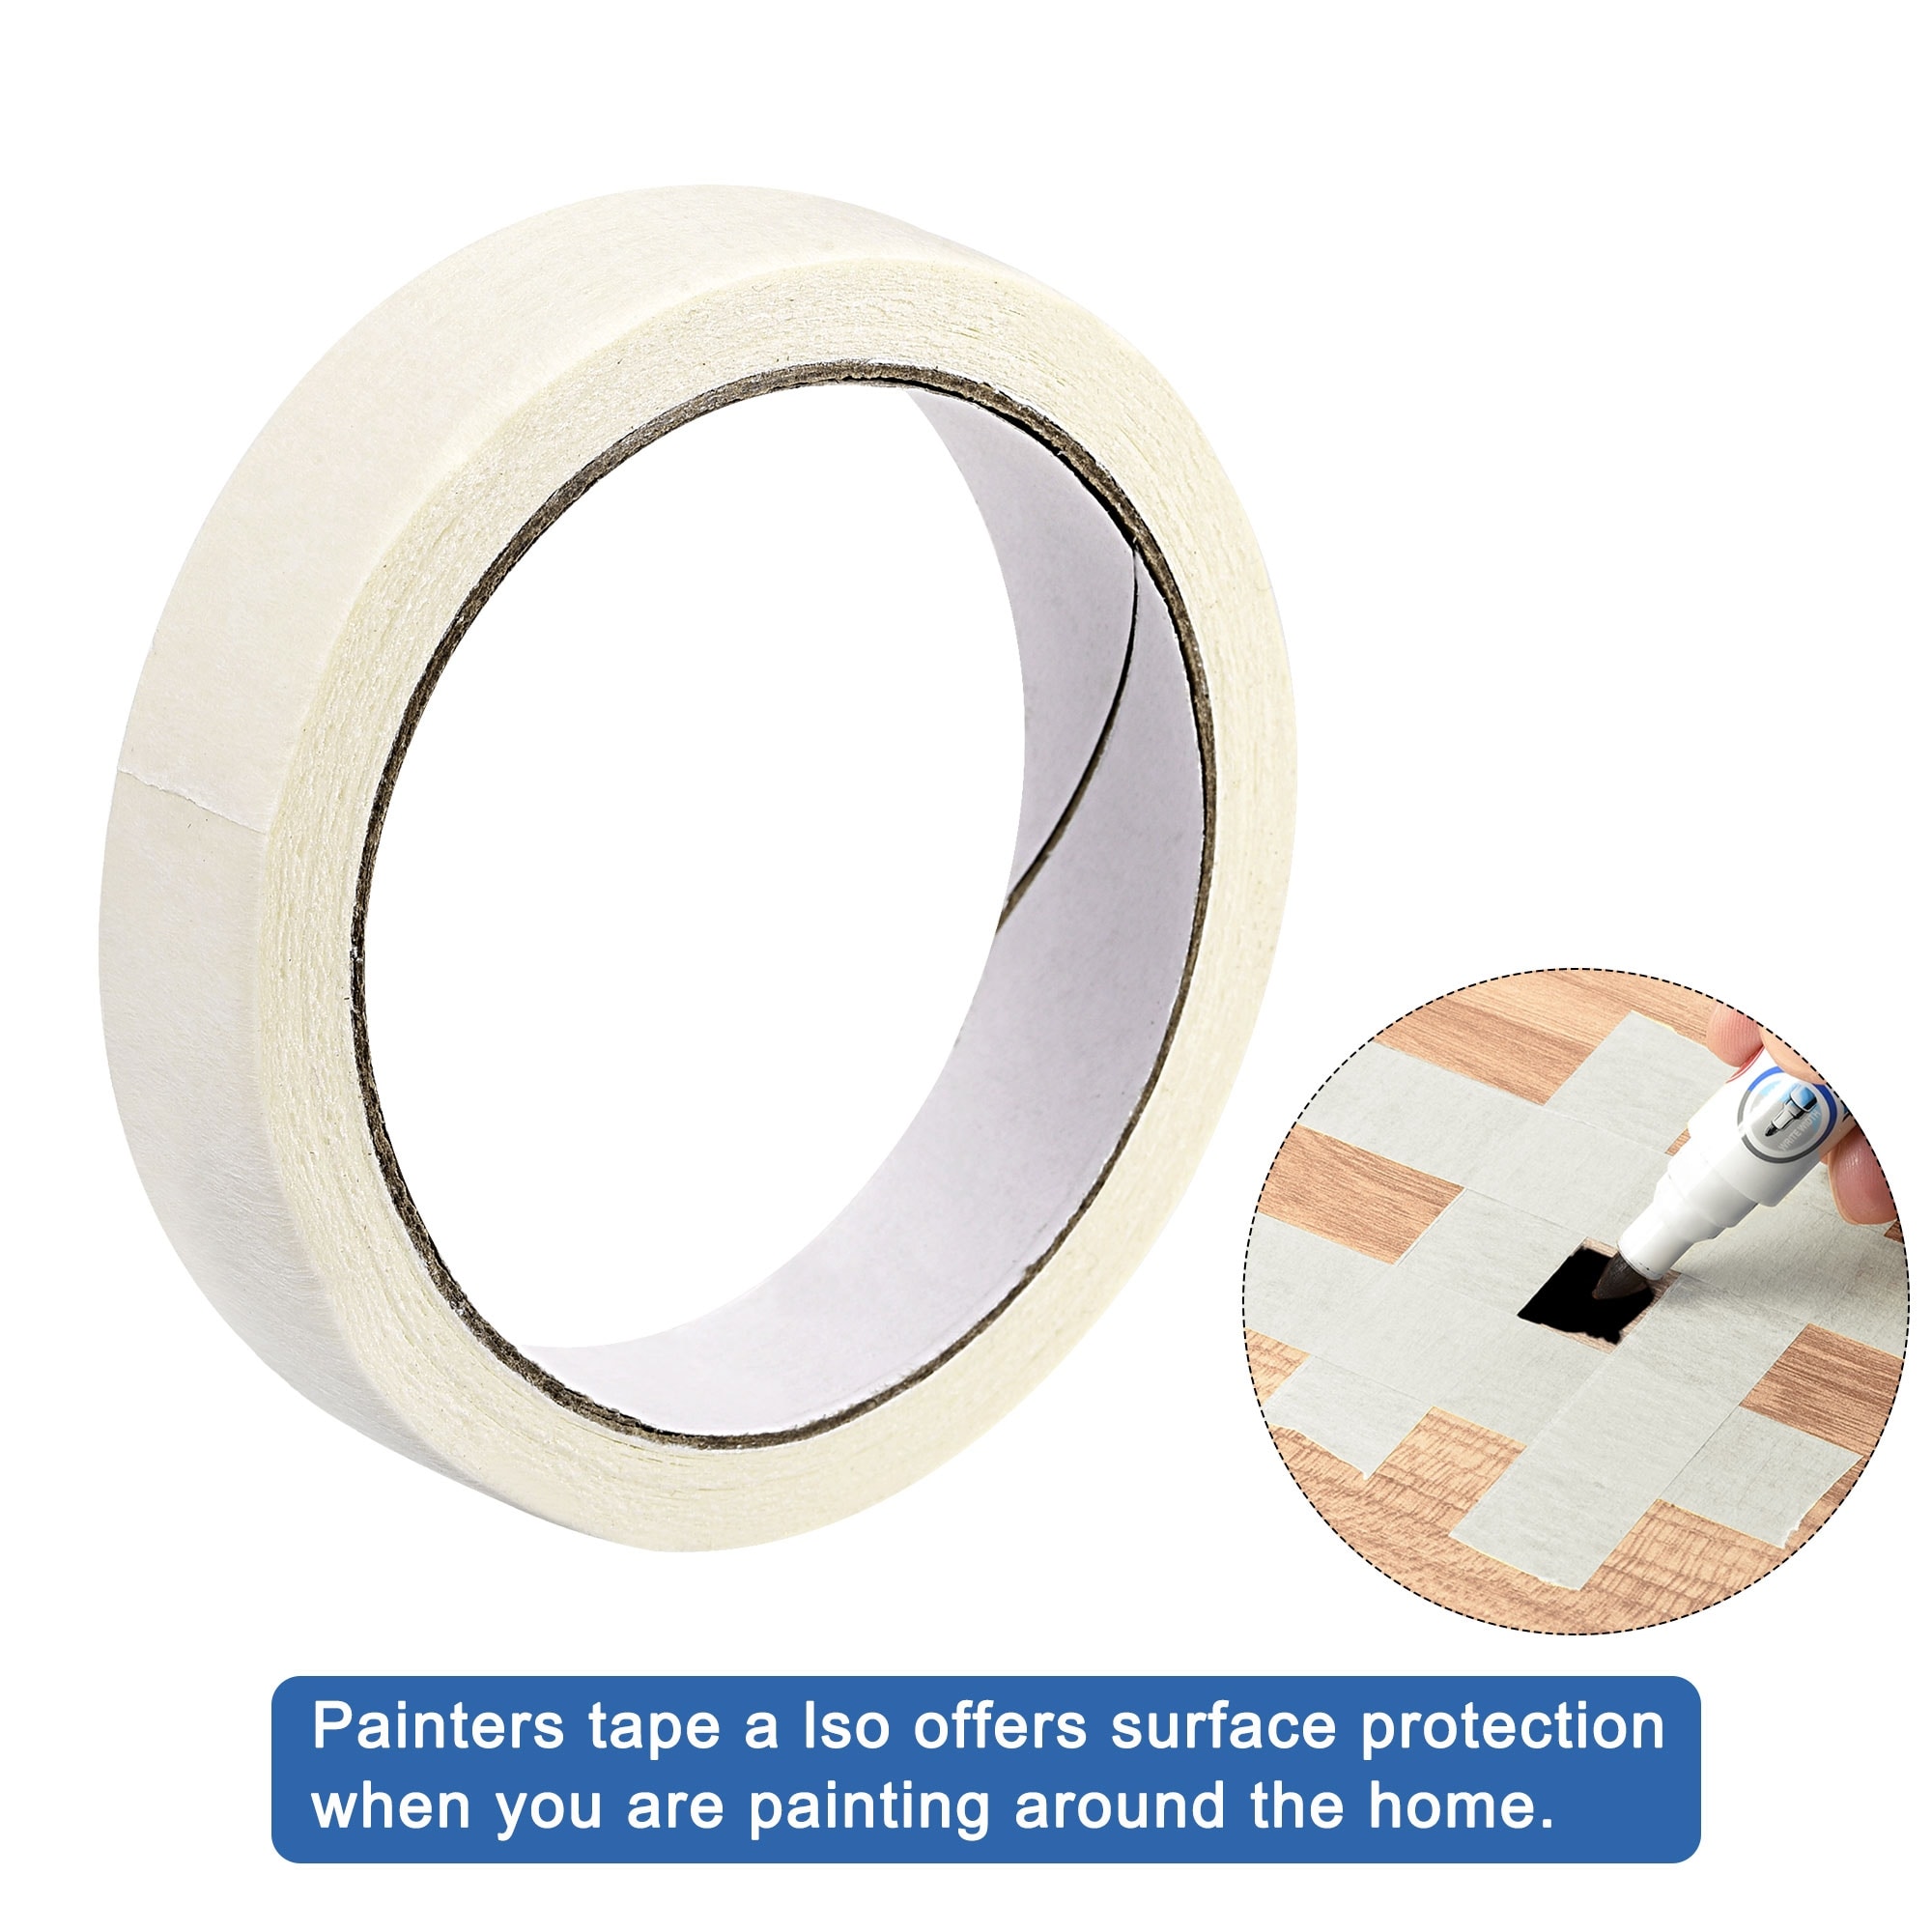 Painters Tape Adhesive Painting Tape 0.79 Inches x 21.87 Yards White 3 Pcs - 2cm x 20m